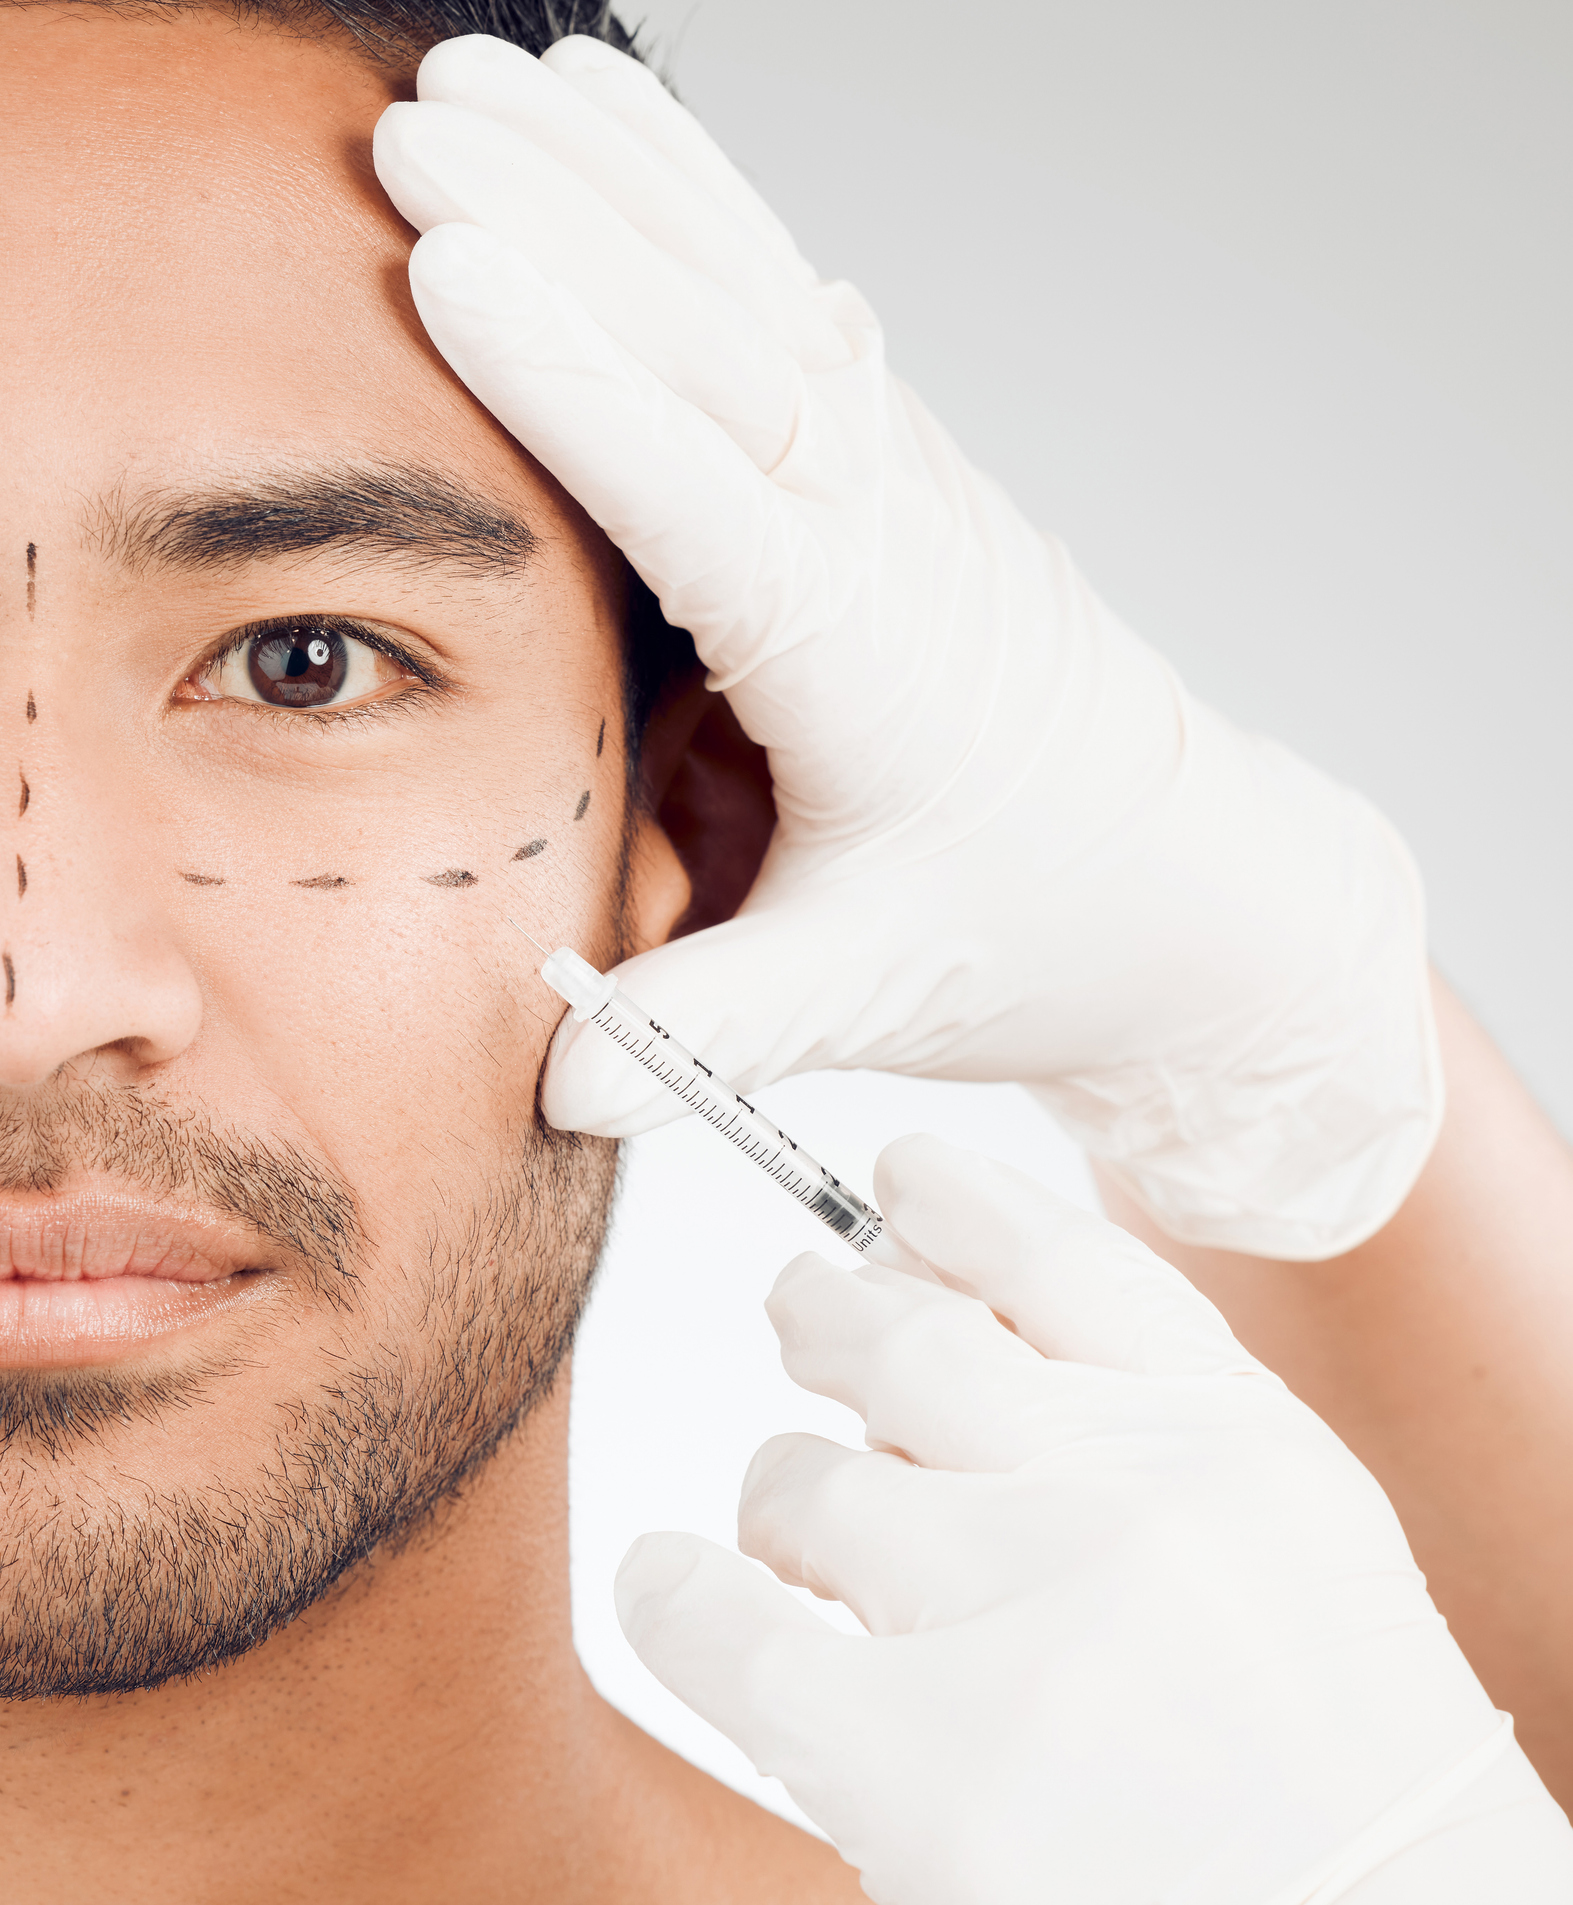 Studio shot of a handsome young man getting his face marked by gloved hands while posing against a grey background while receiving botox under eyes injection